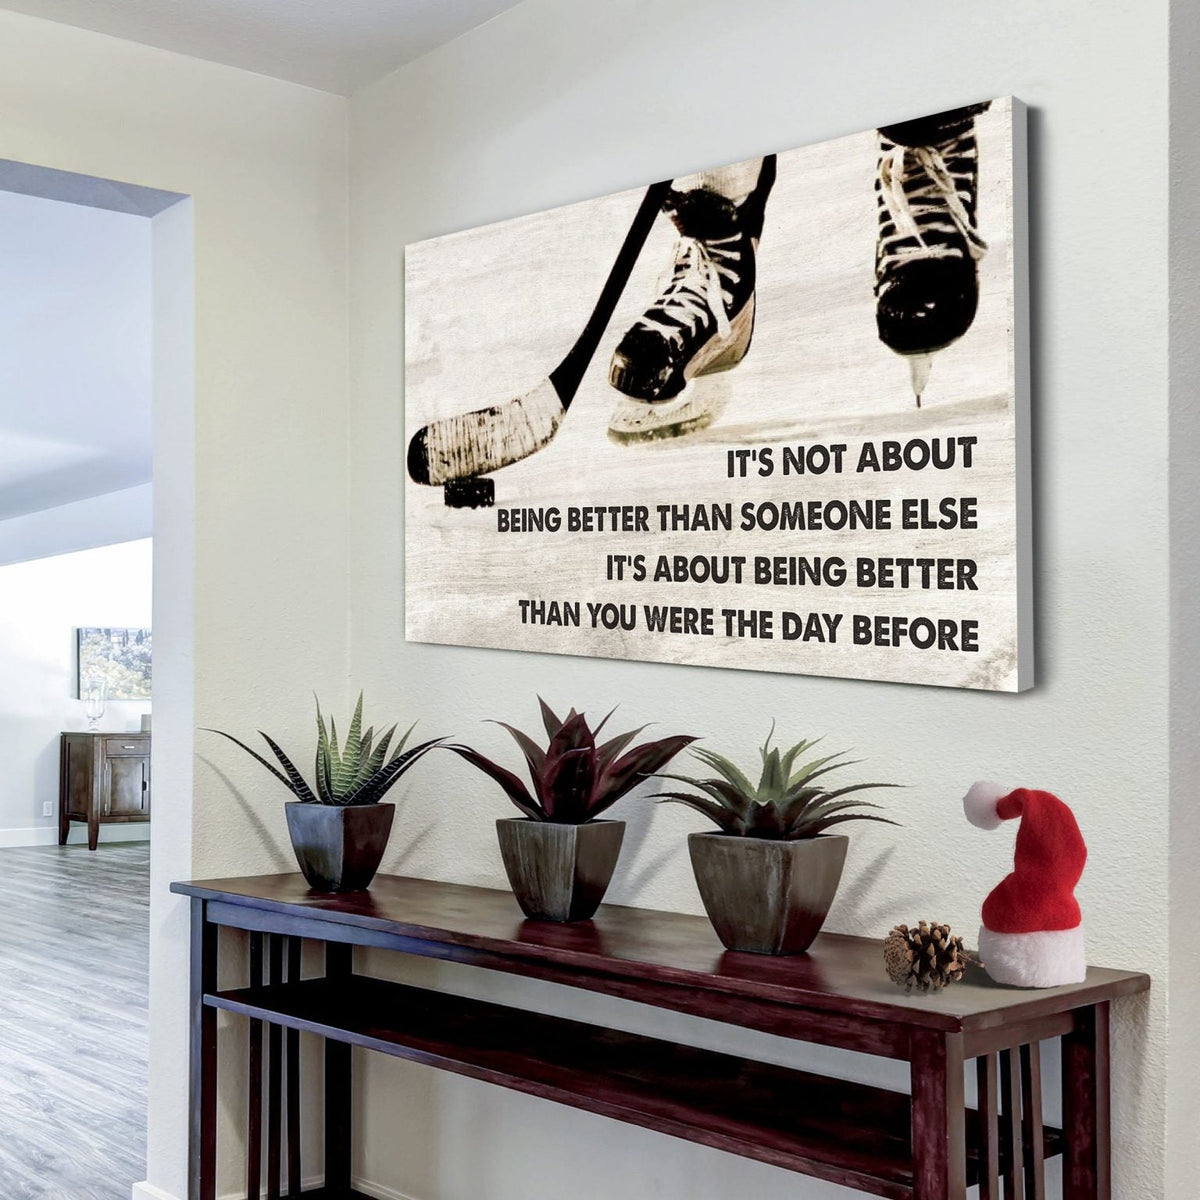 Hockey customizable poster canvas - It is not about better than someone else, It is about being better than you were the day before